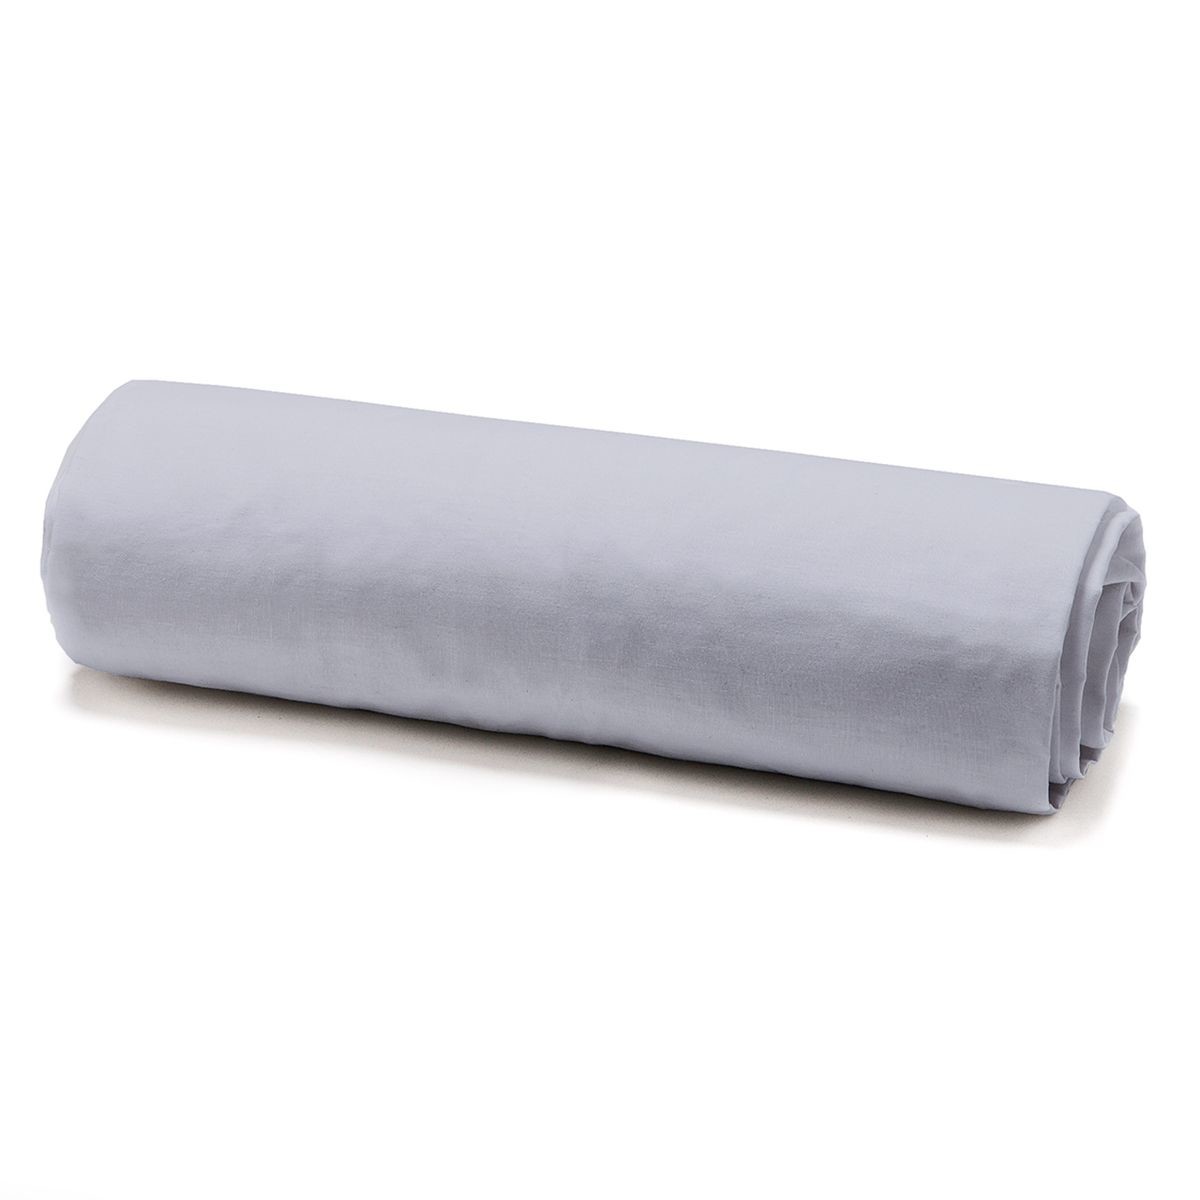 Home Fitted sheet Today TODAY PREMIUM Grey